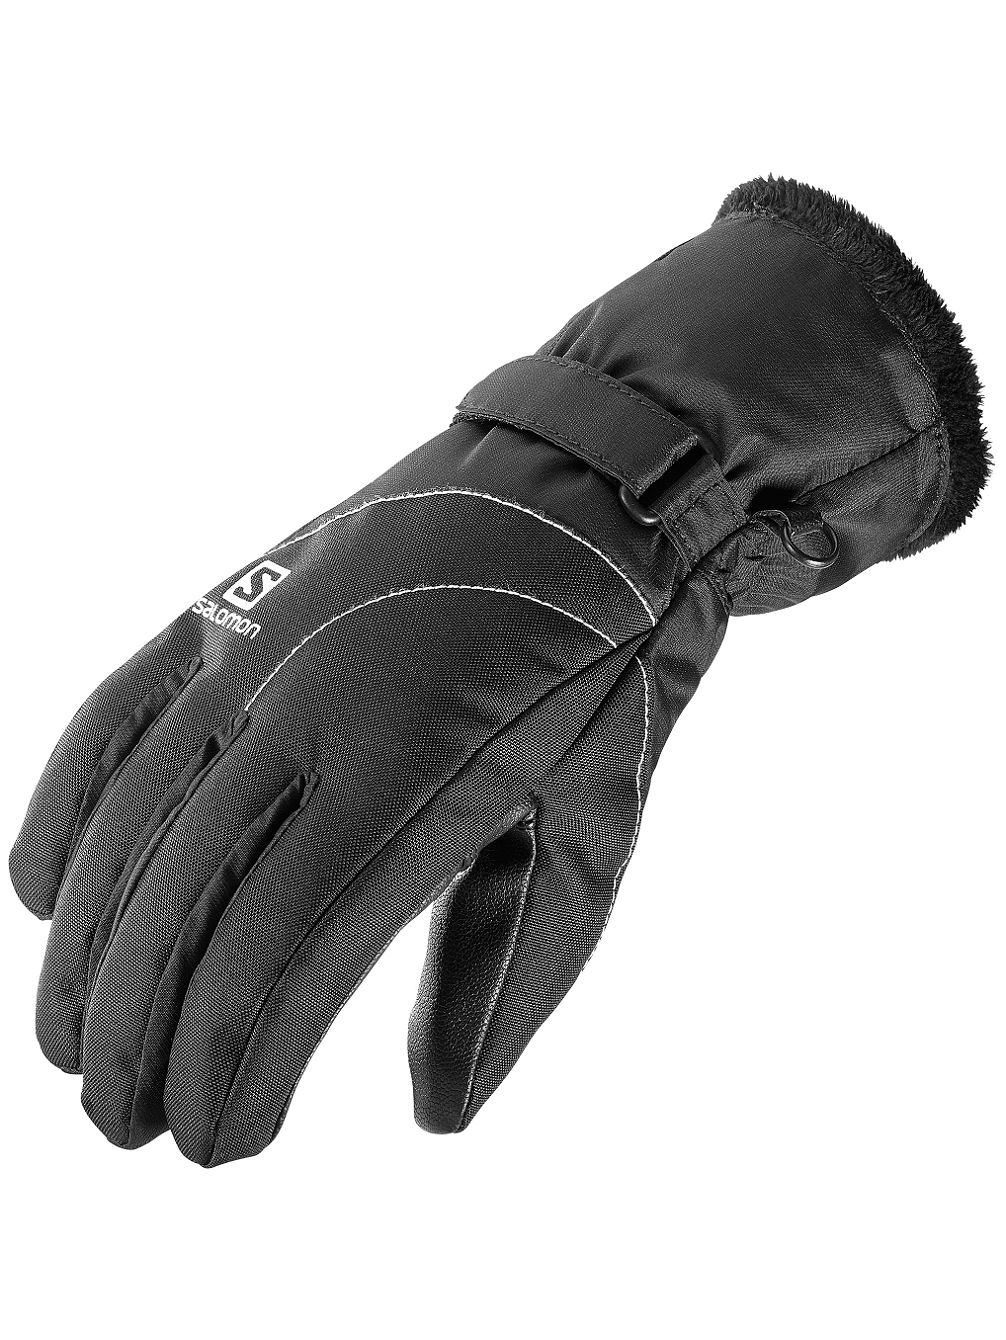 Force Gore-Tex Gloves